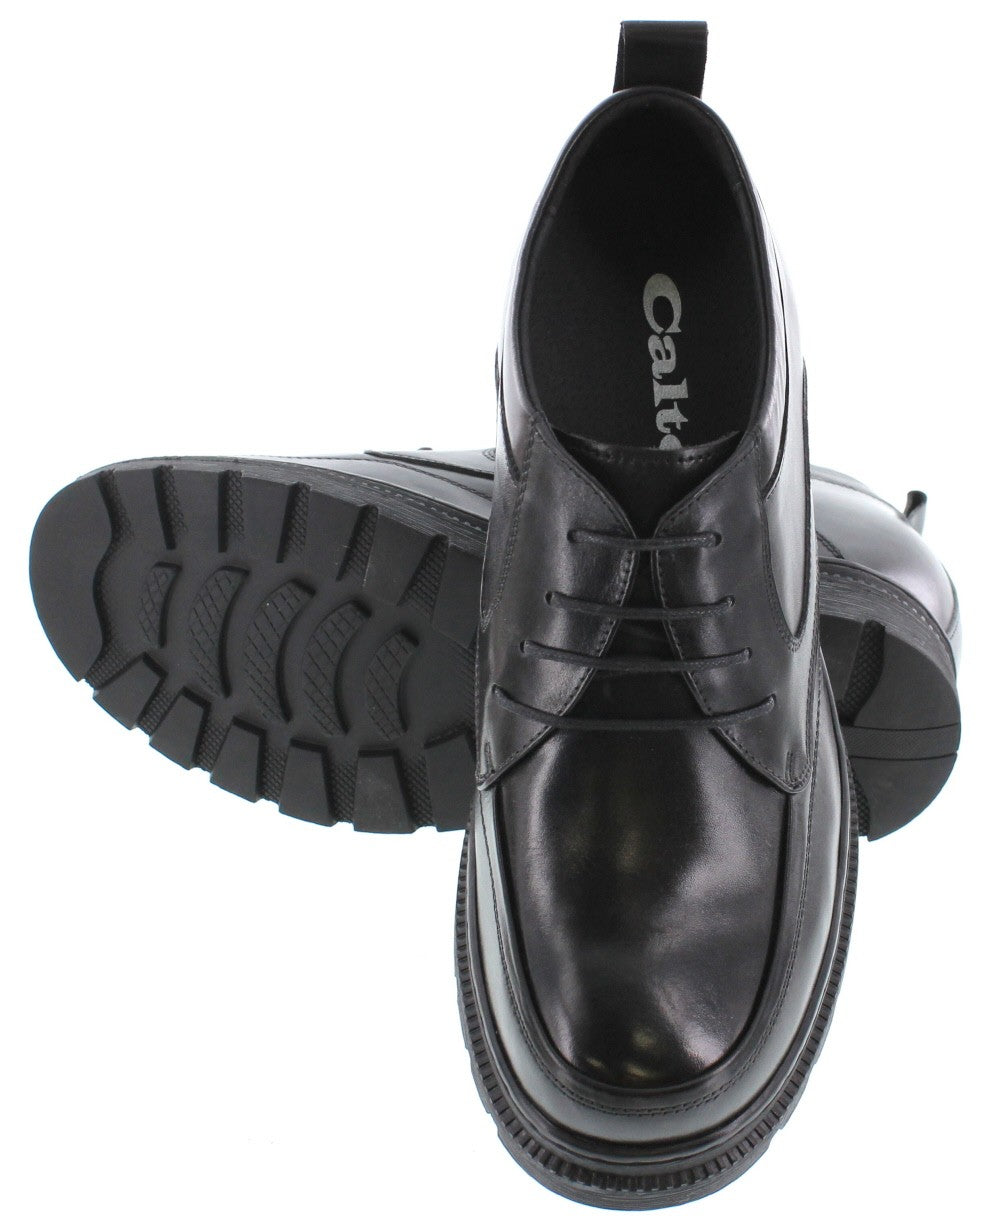 Elevator shoes height increase CALTO Black Leather Elevator Shoes - Four Inches - T52615